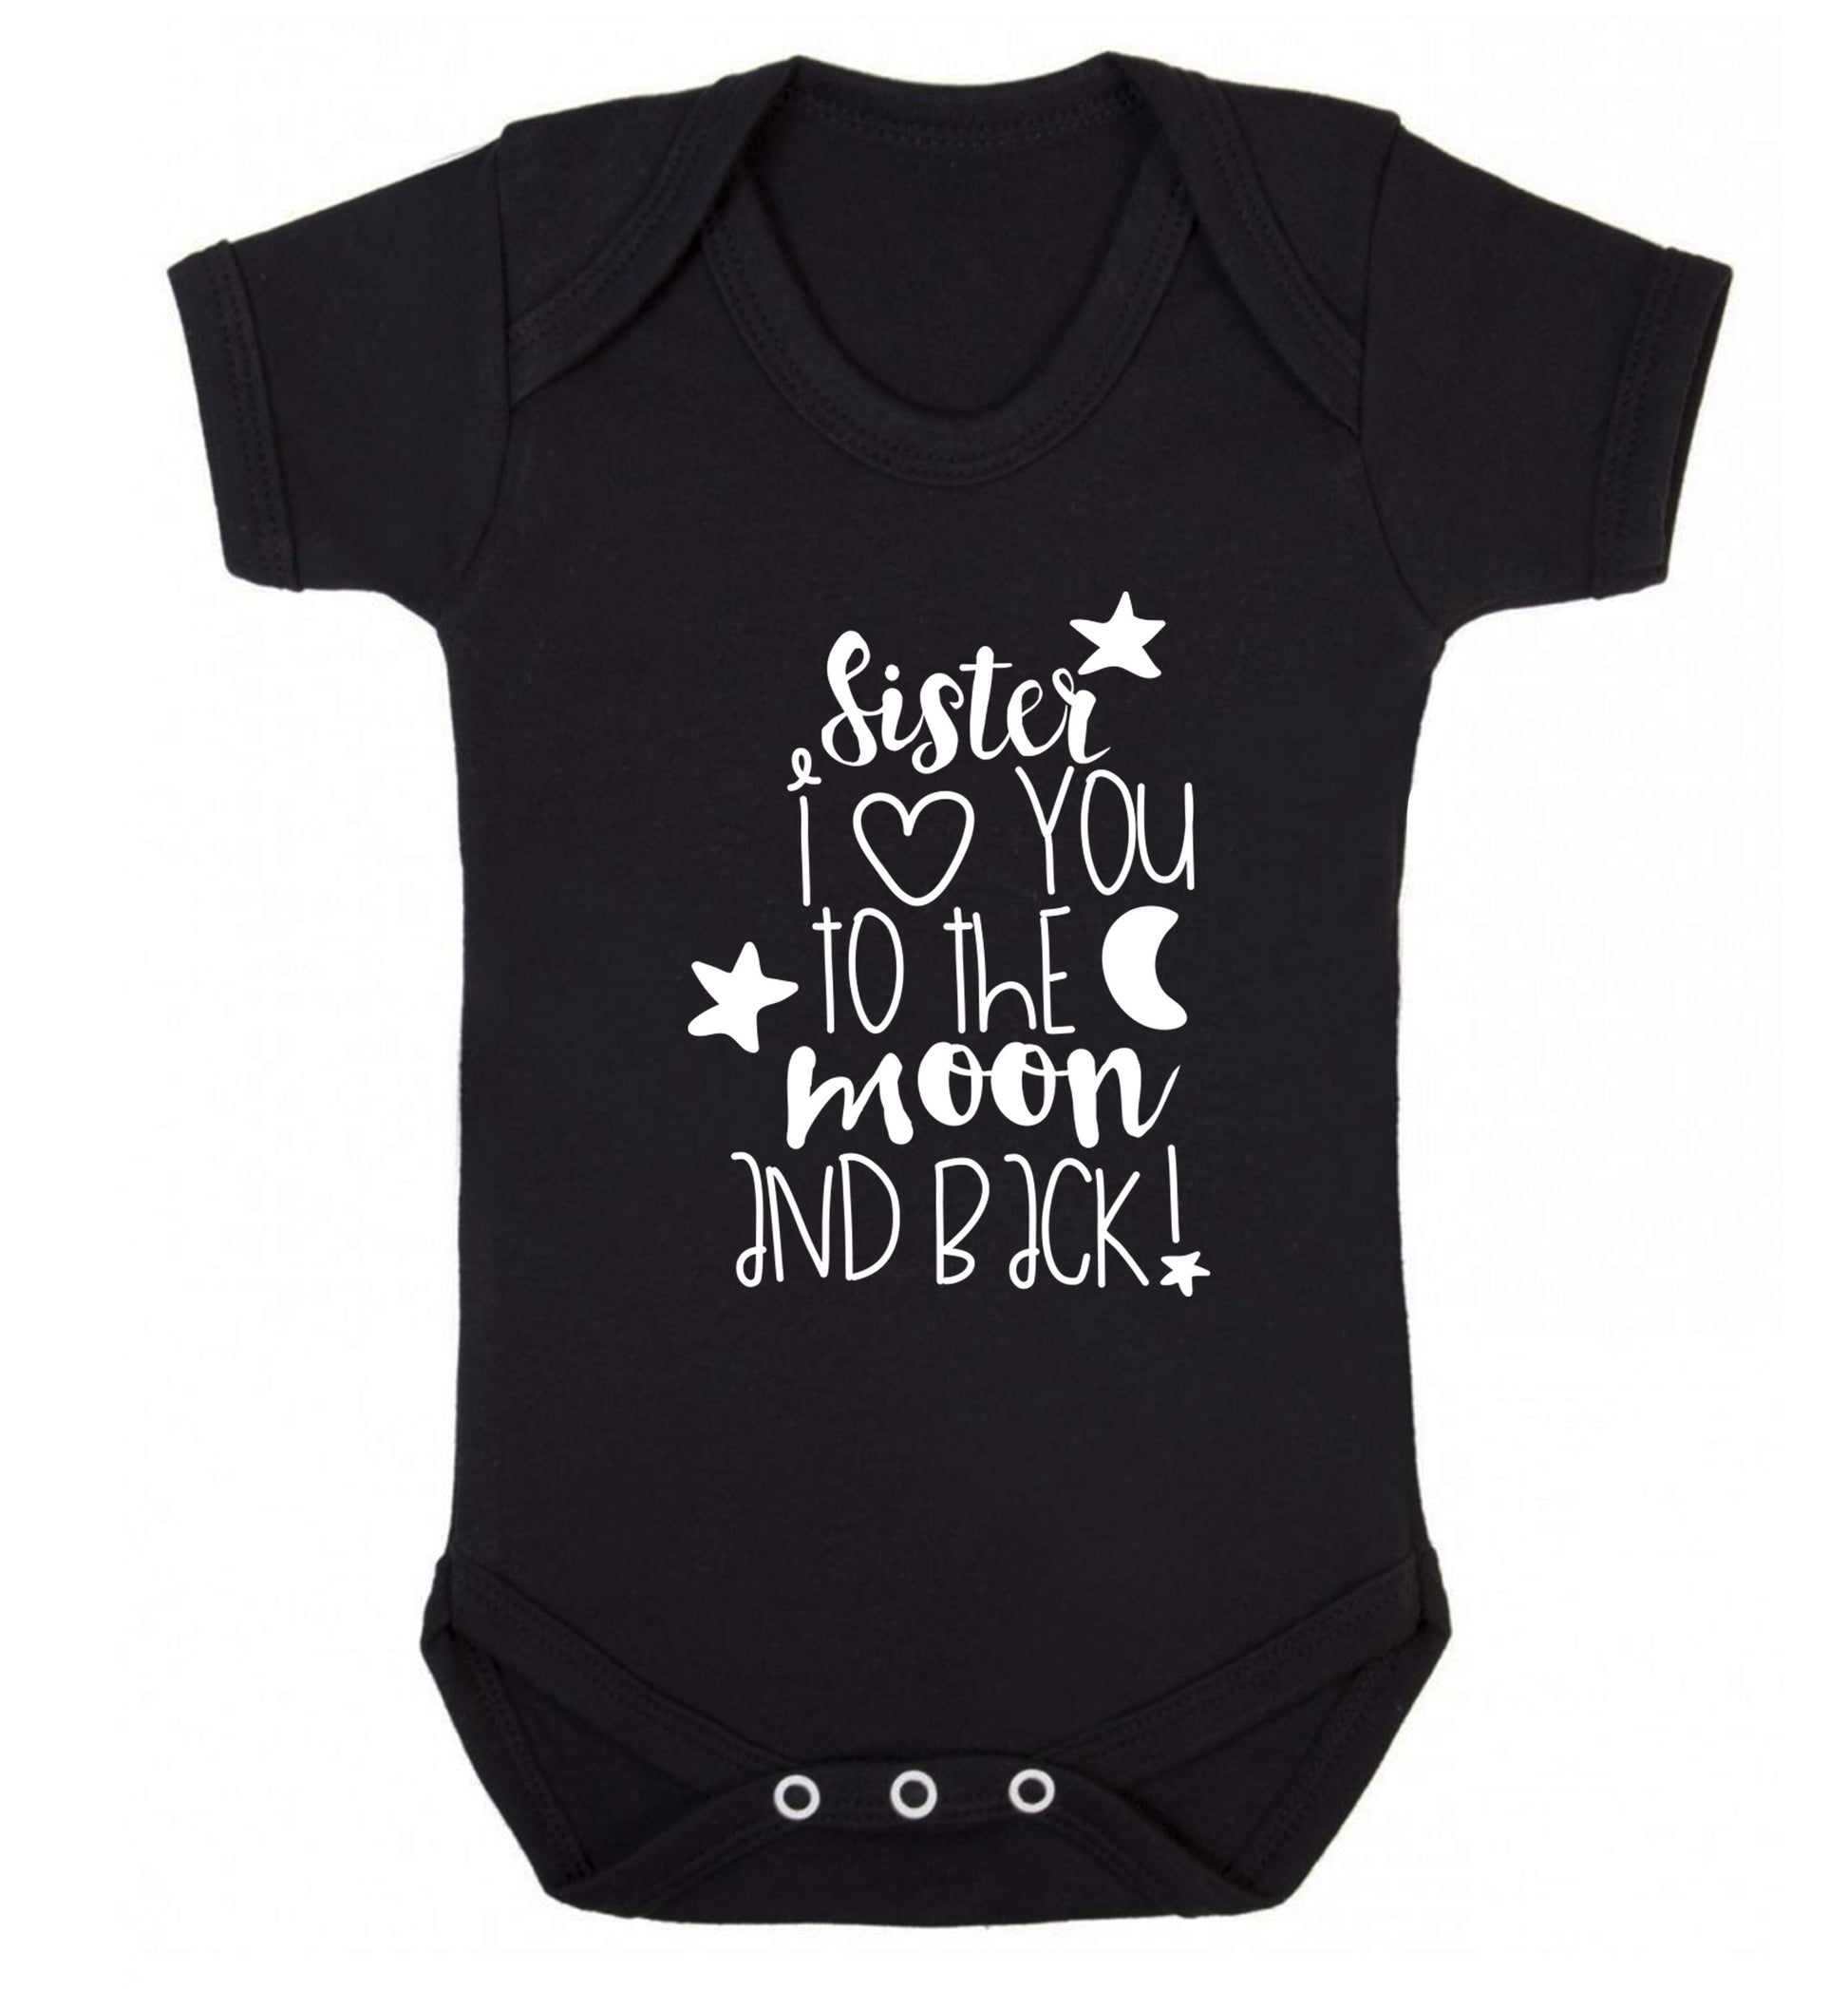 Sister I love you to the moon and back Baby Vest black 18-24 months